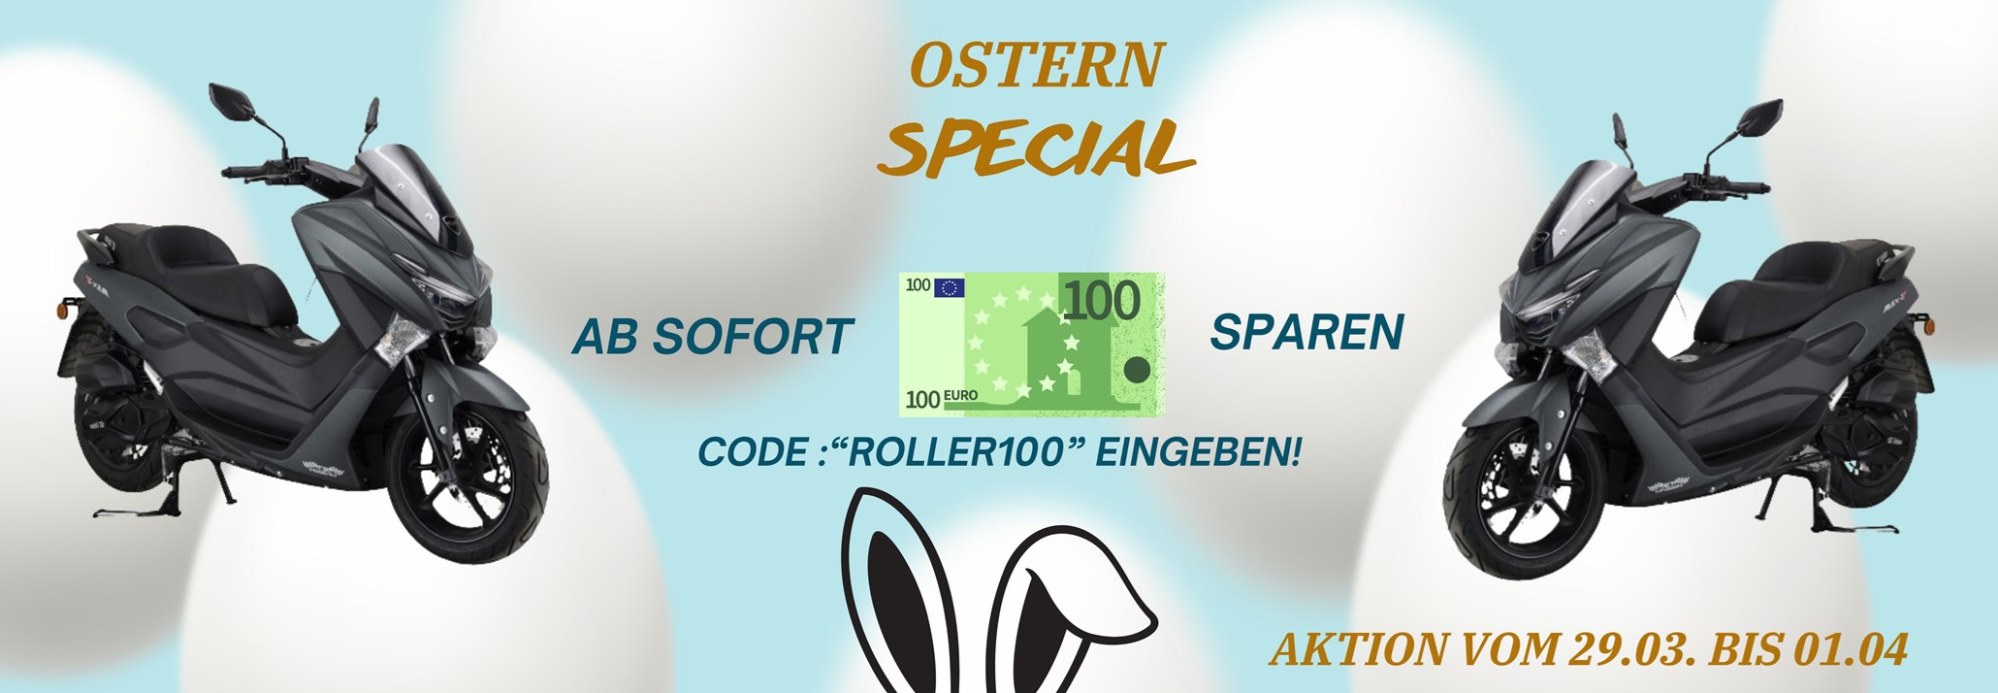 Oster Special